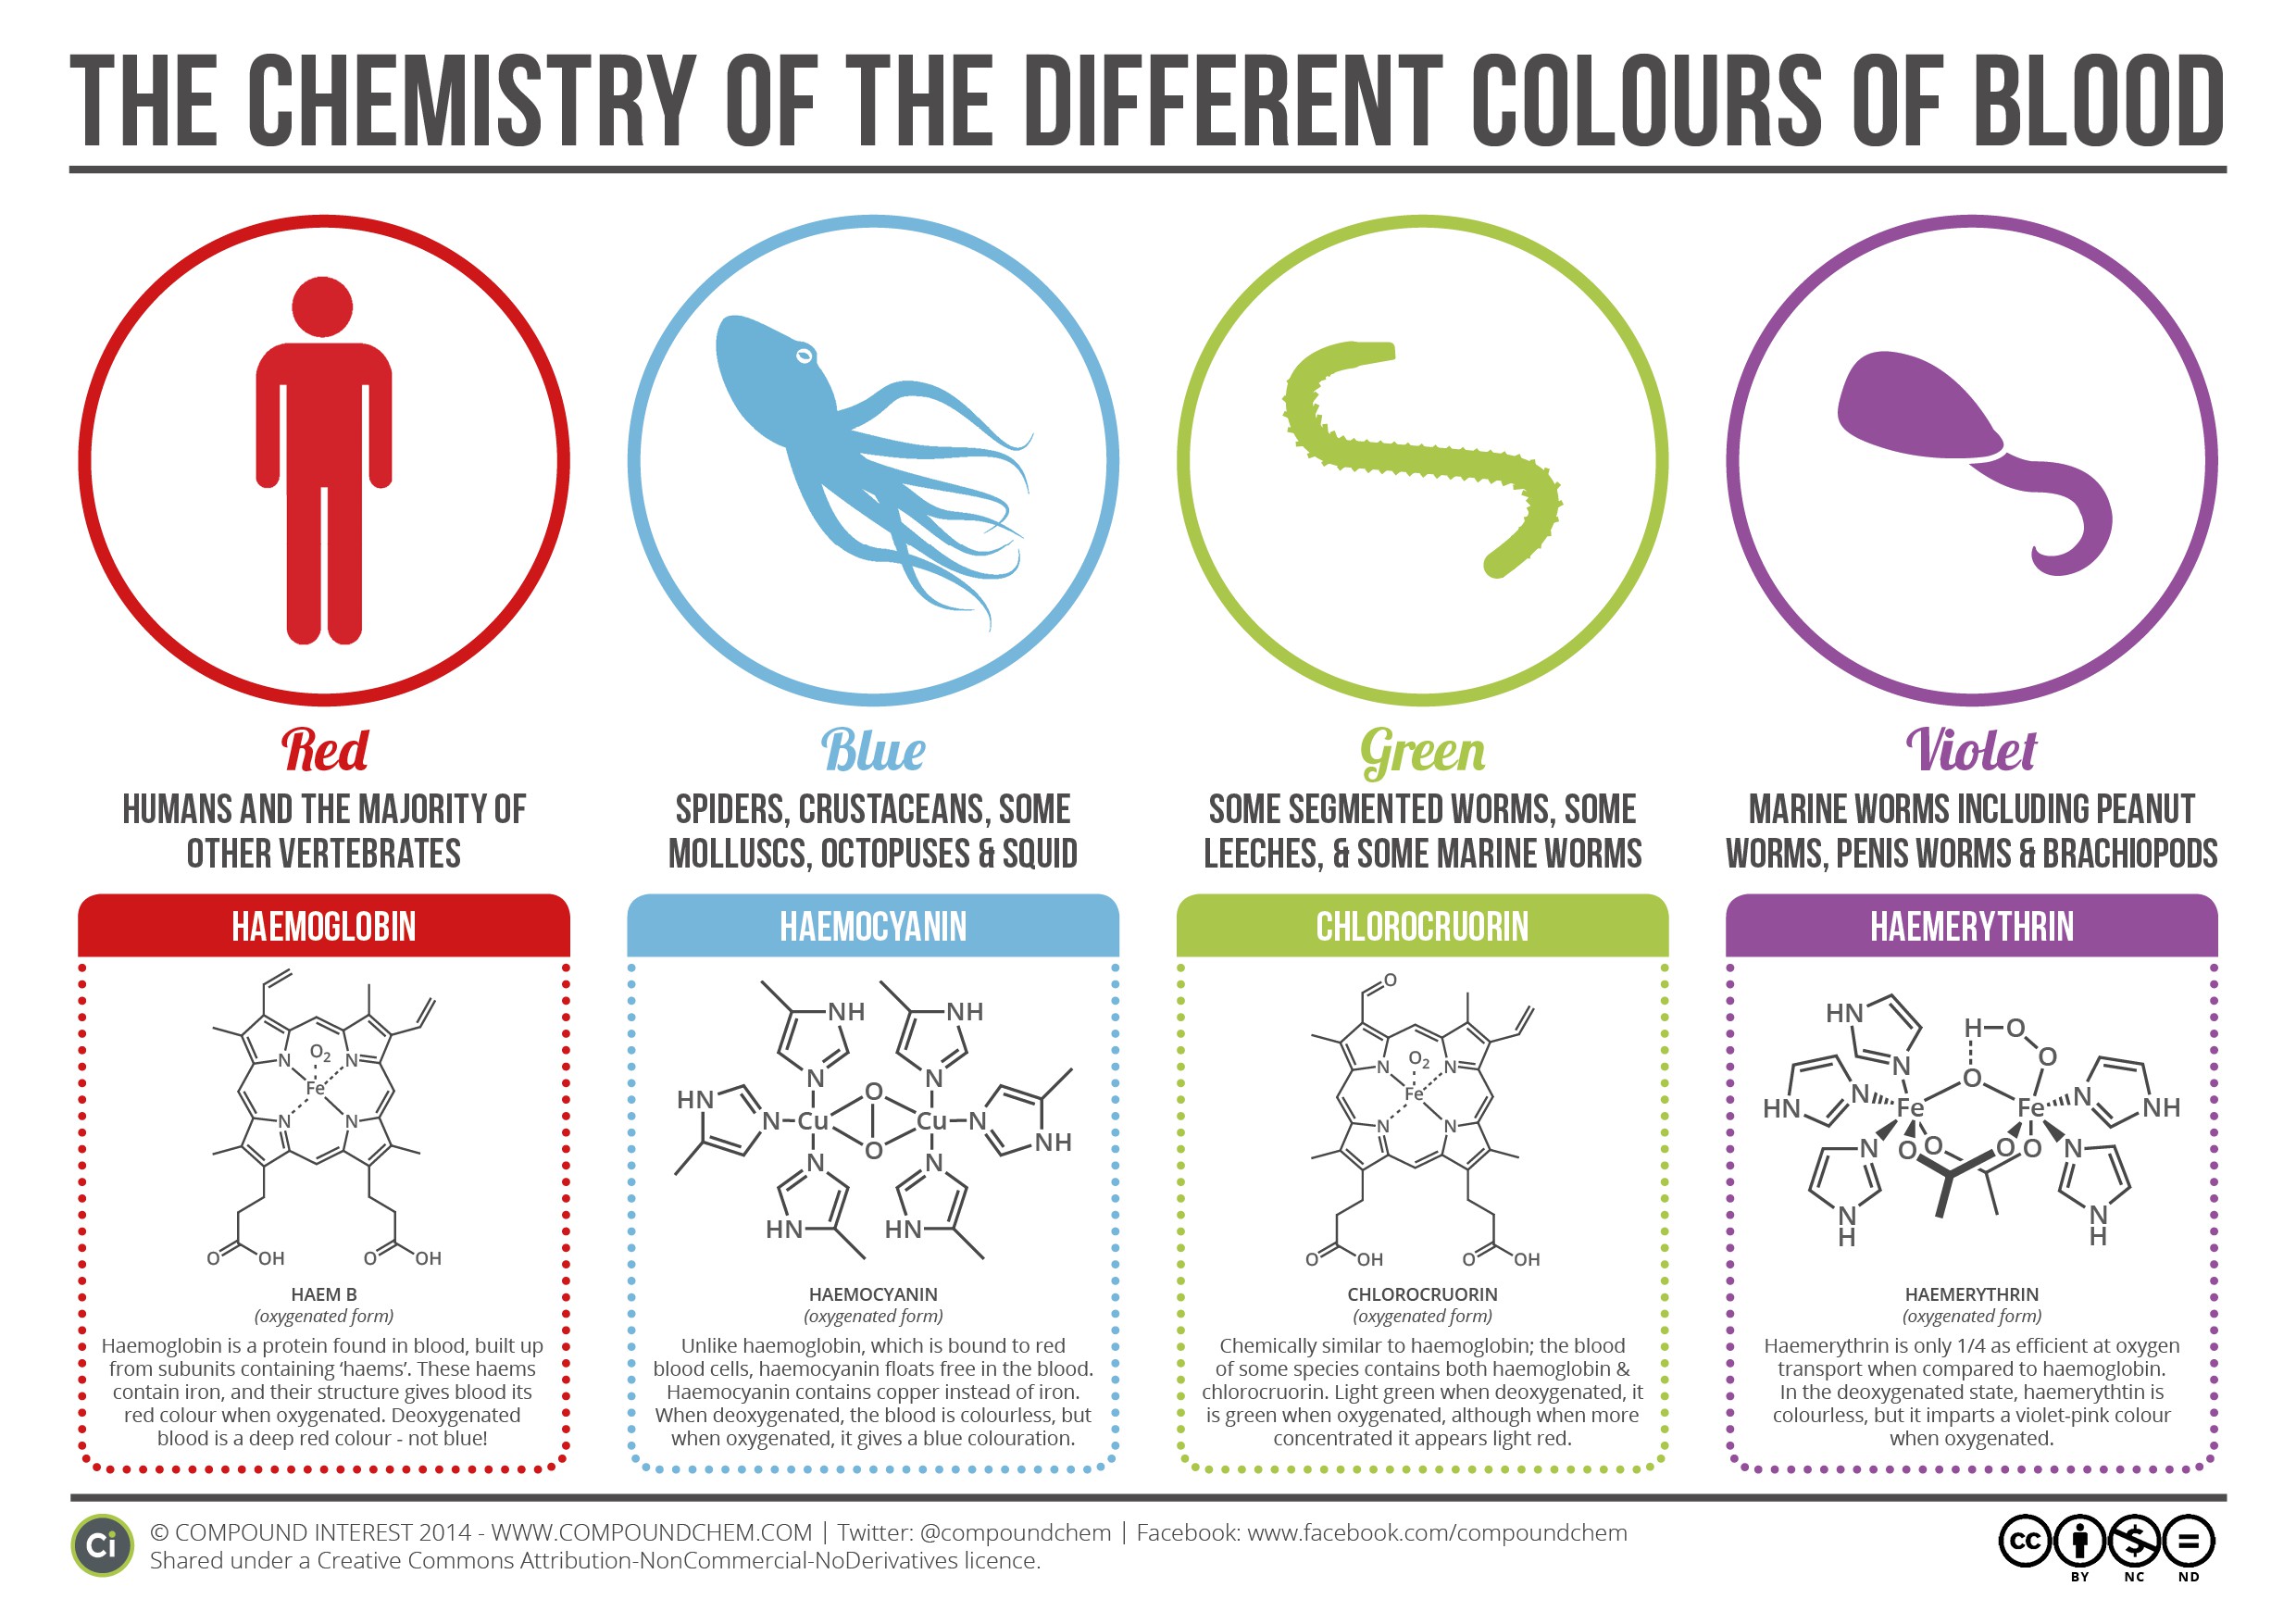 Learn about the chemistry behind the different colors of blood